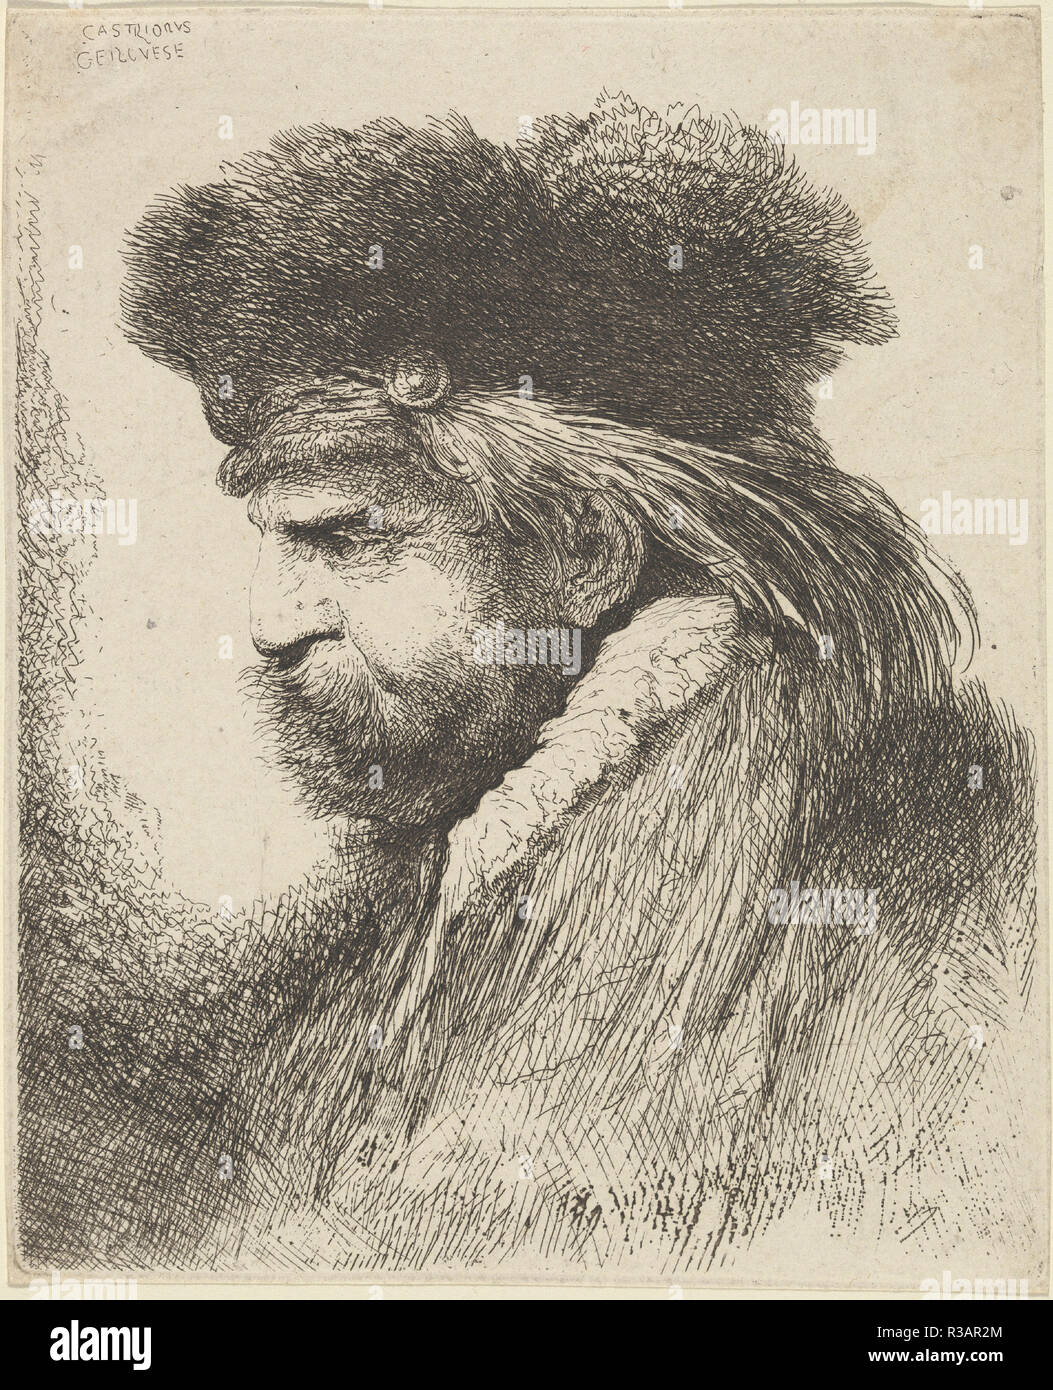 Bearded Man in a Fur Cap, Facing Left. Dated: c. 1645/1647. Dimensions: plate: 18.1 x 14.8 cm (7 1/8 x 5 13/16 in.)  sheet: 18.4 x 15.1 cm (7 1/4 x 5 15/16 in.). Medium: etching on laid paper. Museum: National Gallery of Art, Washington DC. Author: Giovanni Benedetto Castiglione. Stock Photo